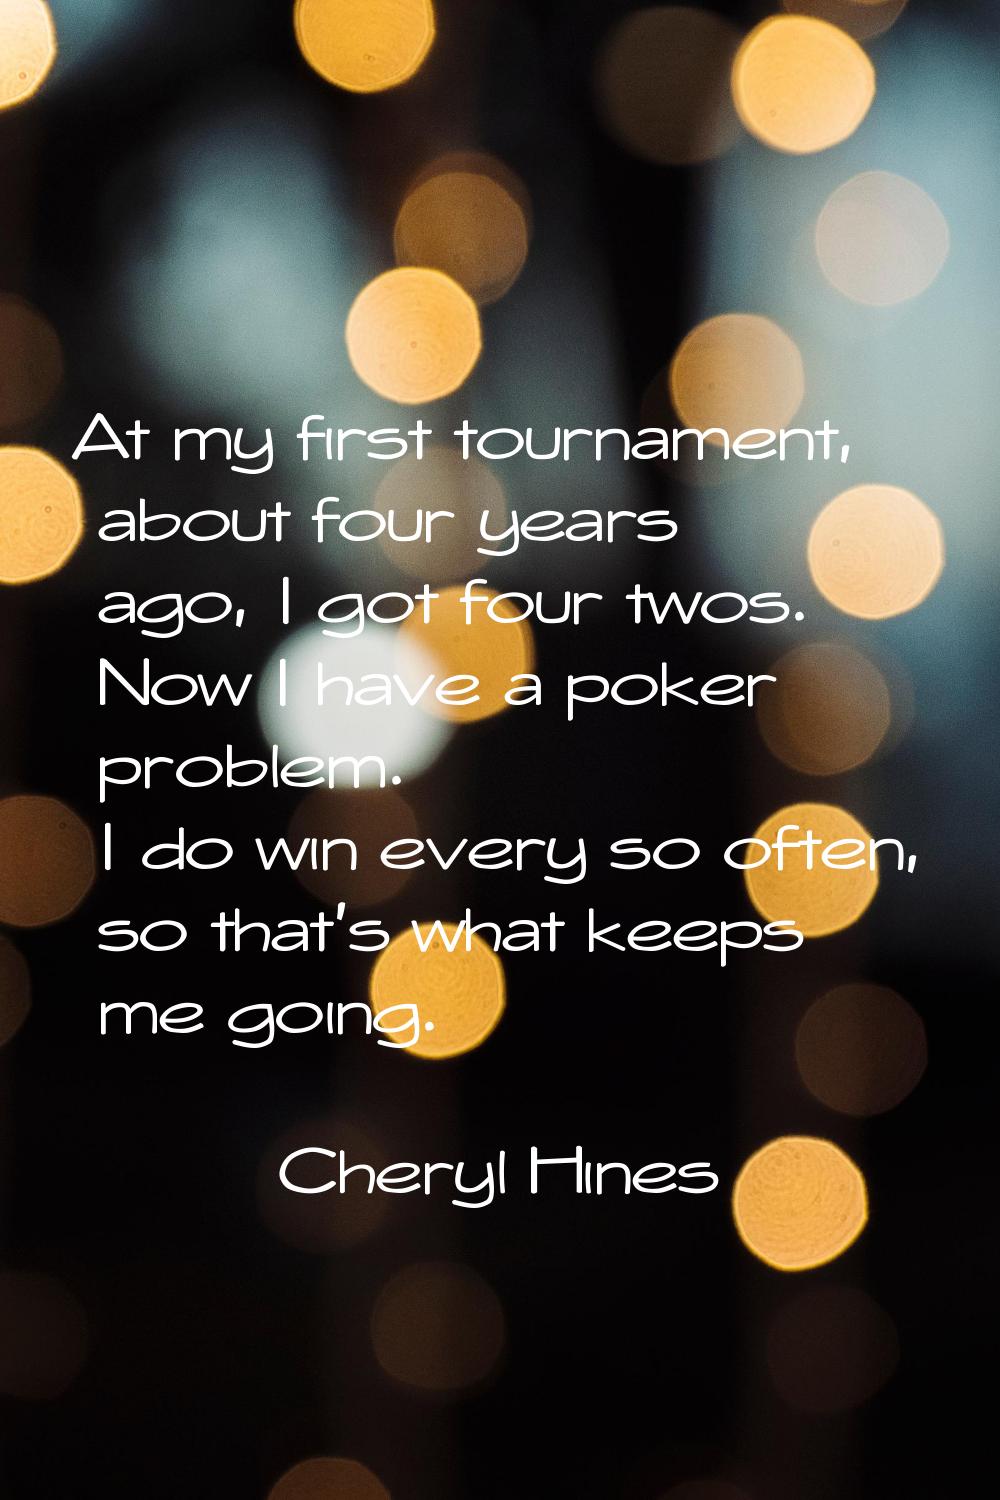 At my first tournament, about four years ago, I got four twos. Now I have a poker problem. I do win